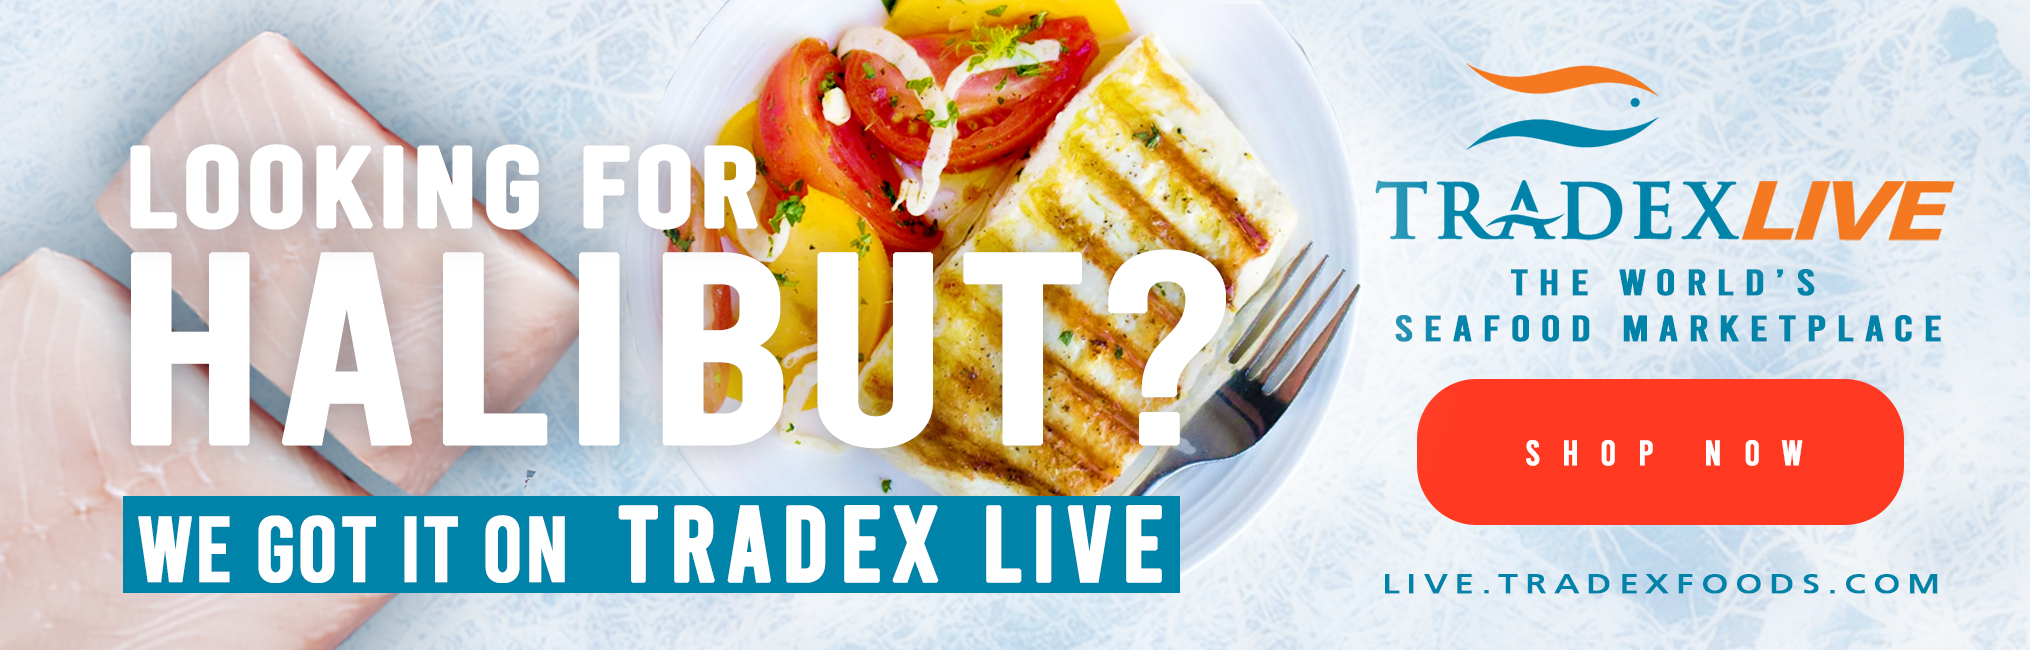 Looking for Halibut? We got it on TradexLIVE